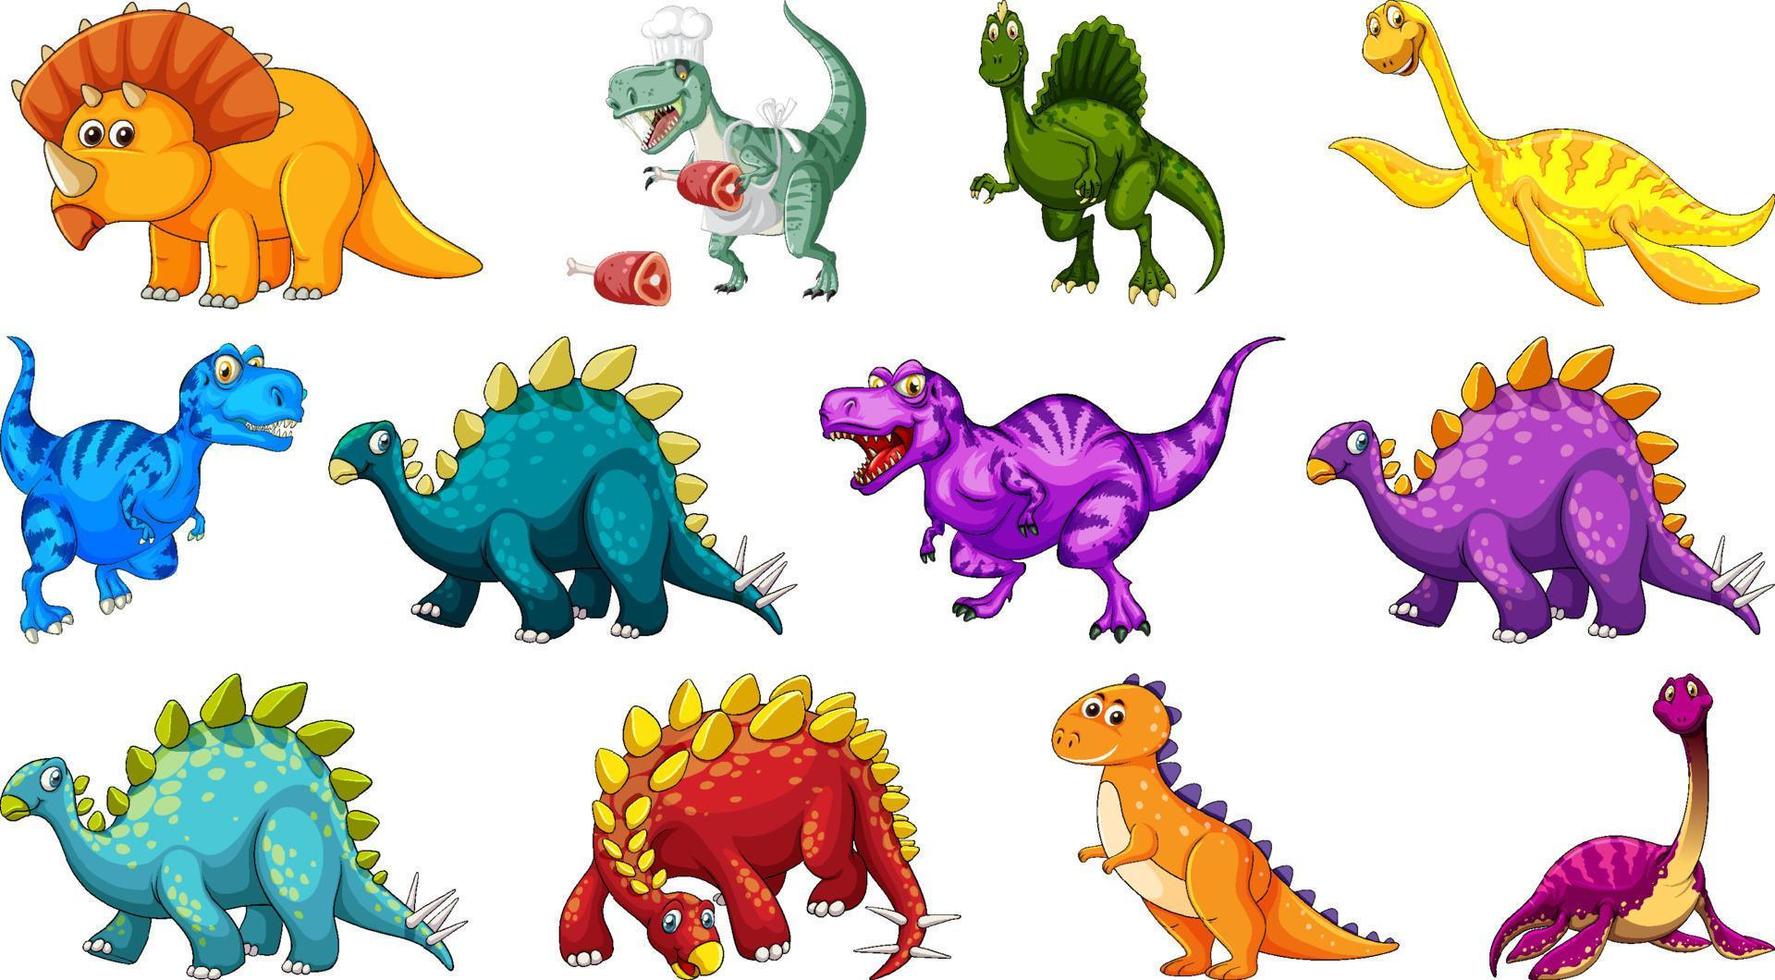 Many dinosaurs on white background vector